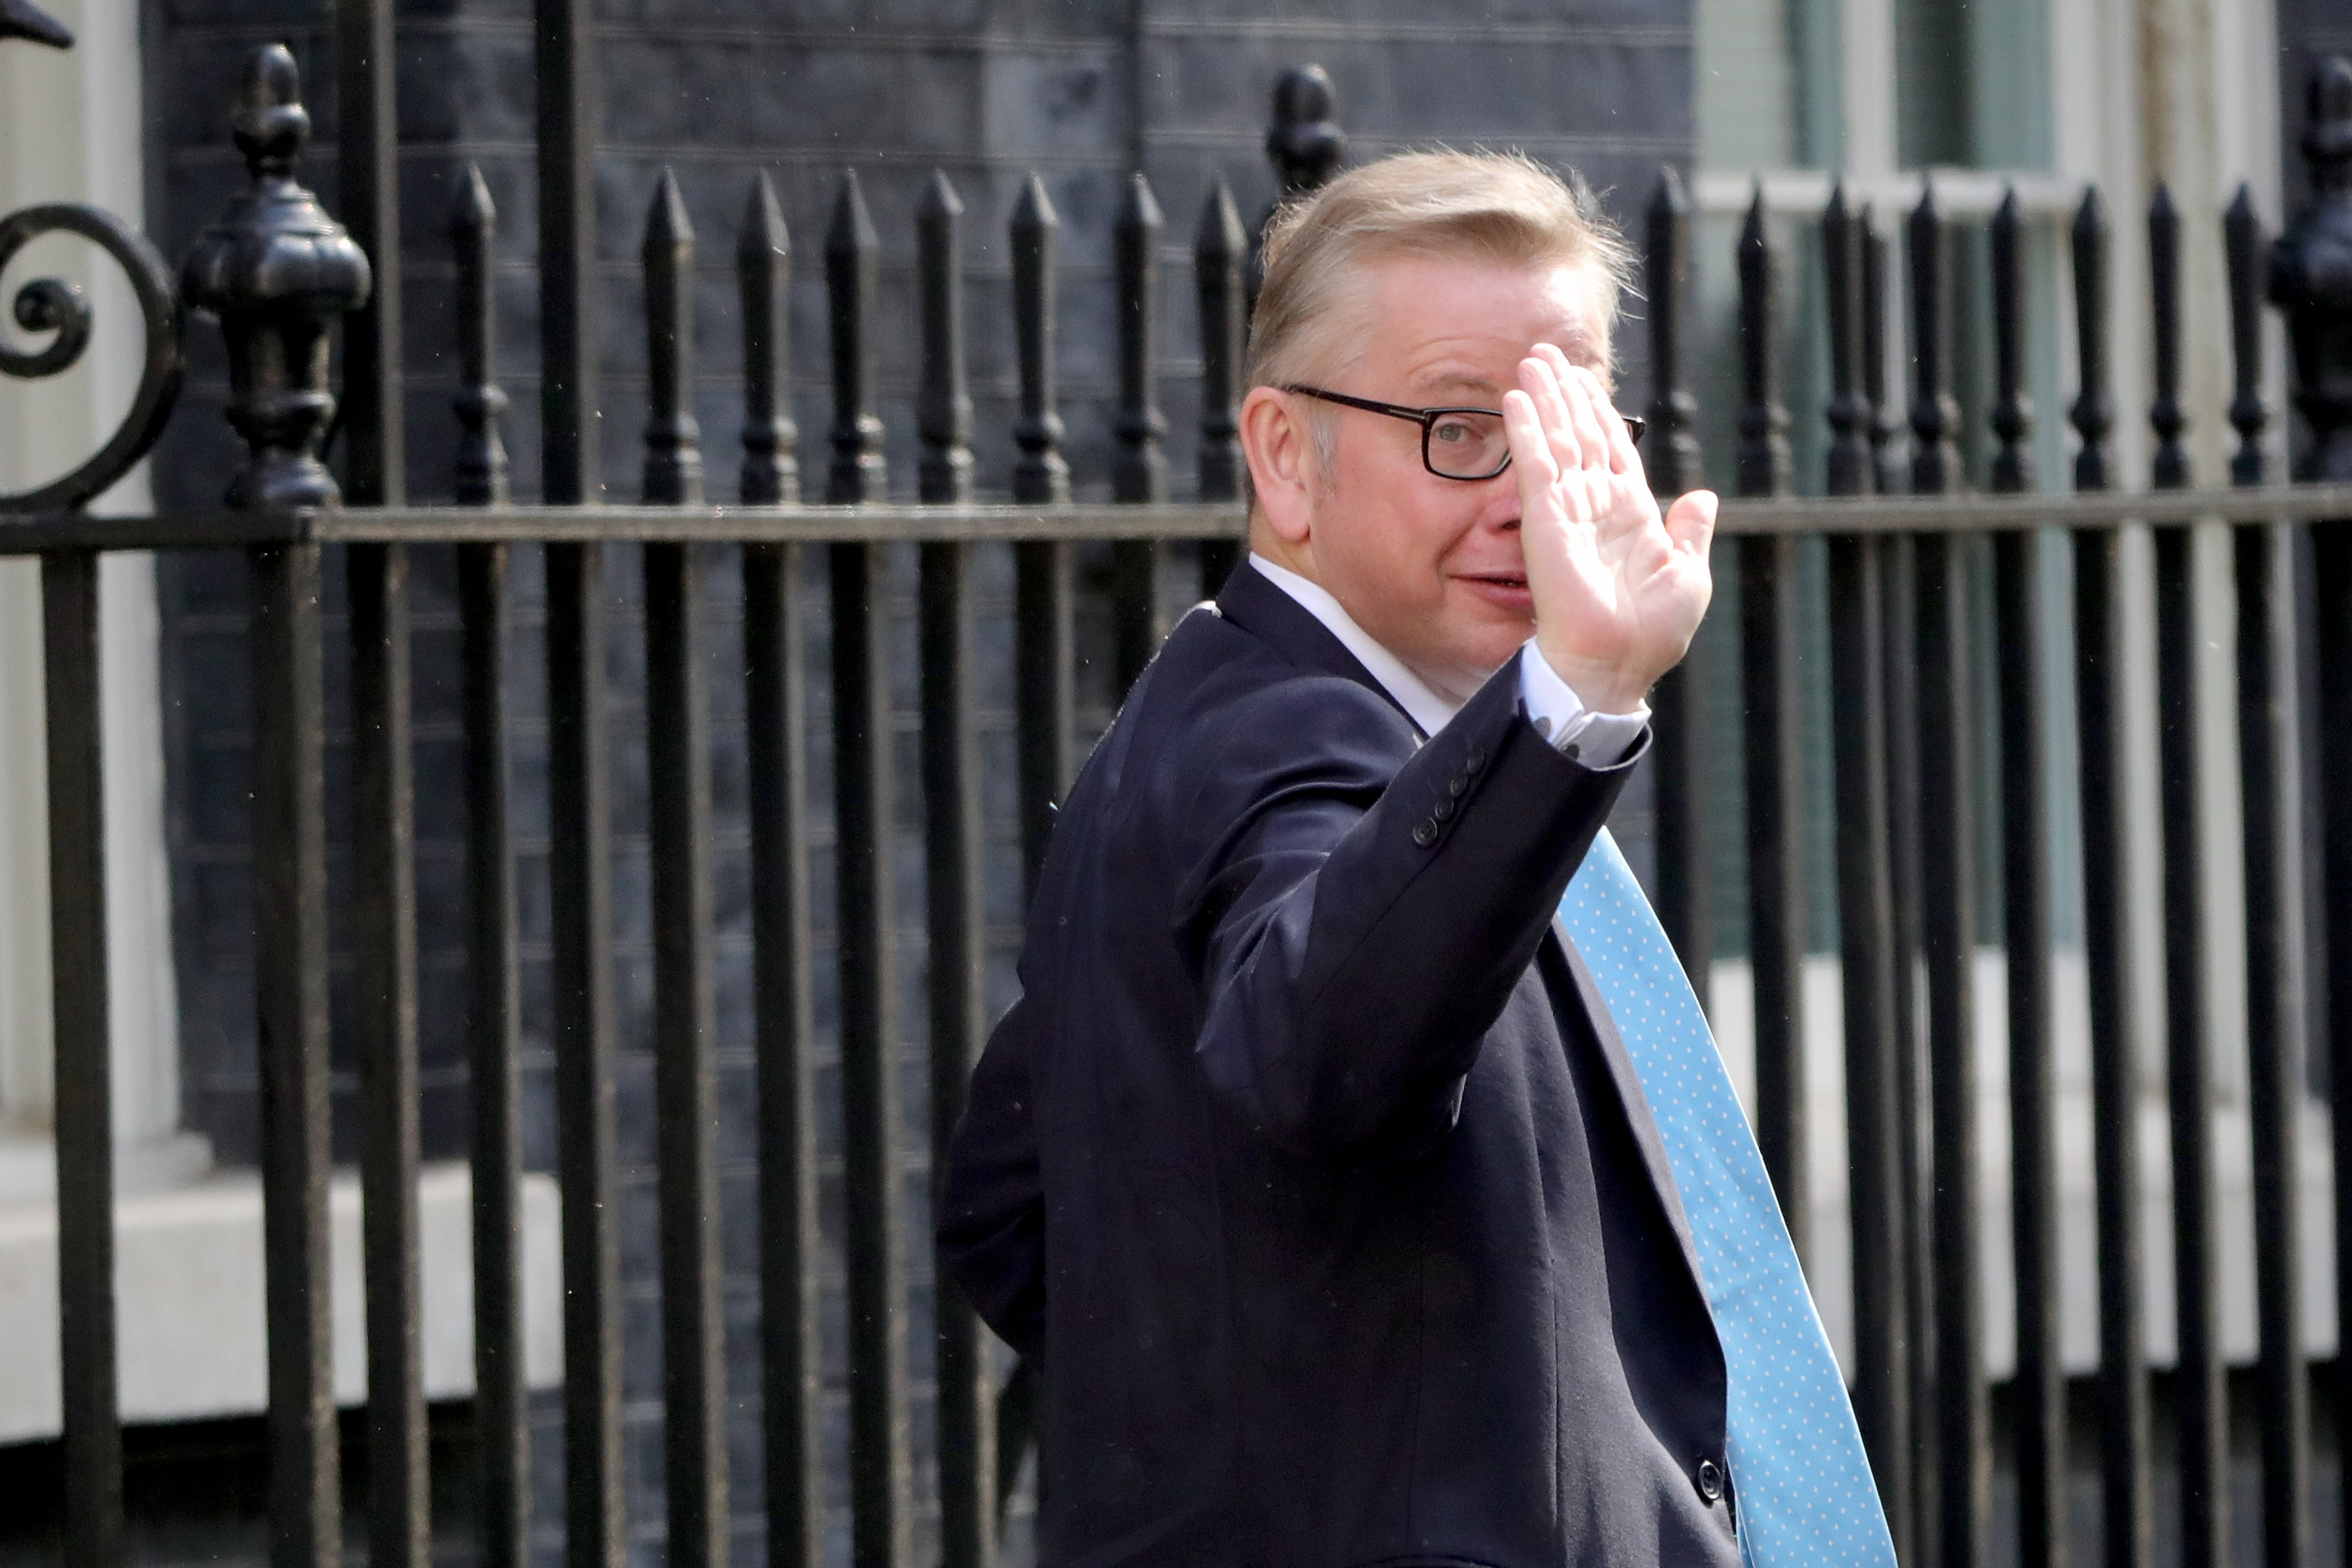 Michael Gove's time as a cabinet minister is over.